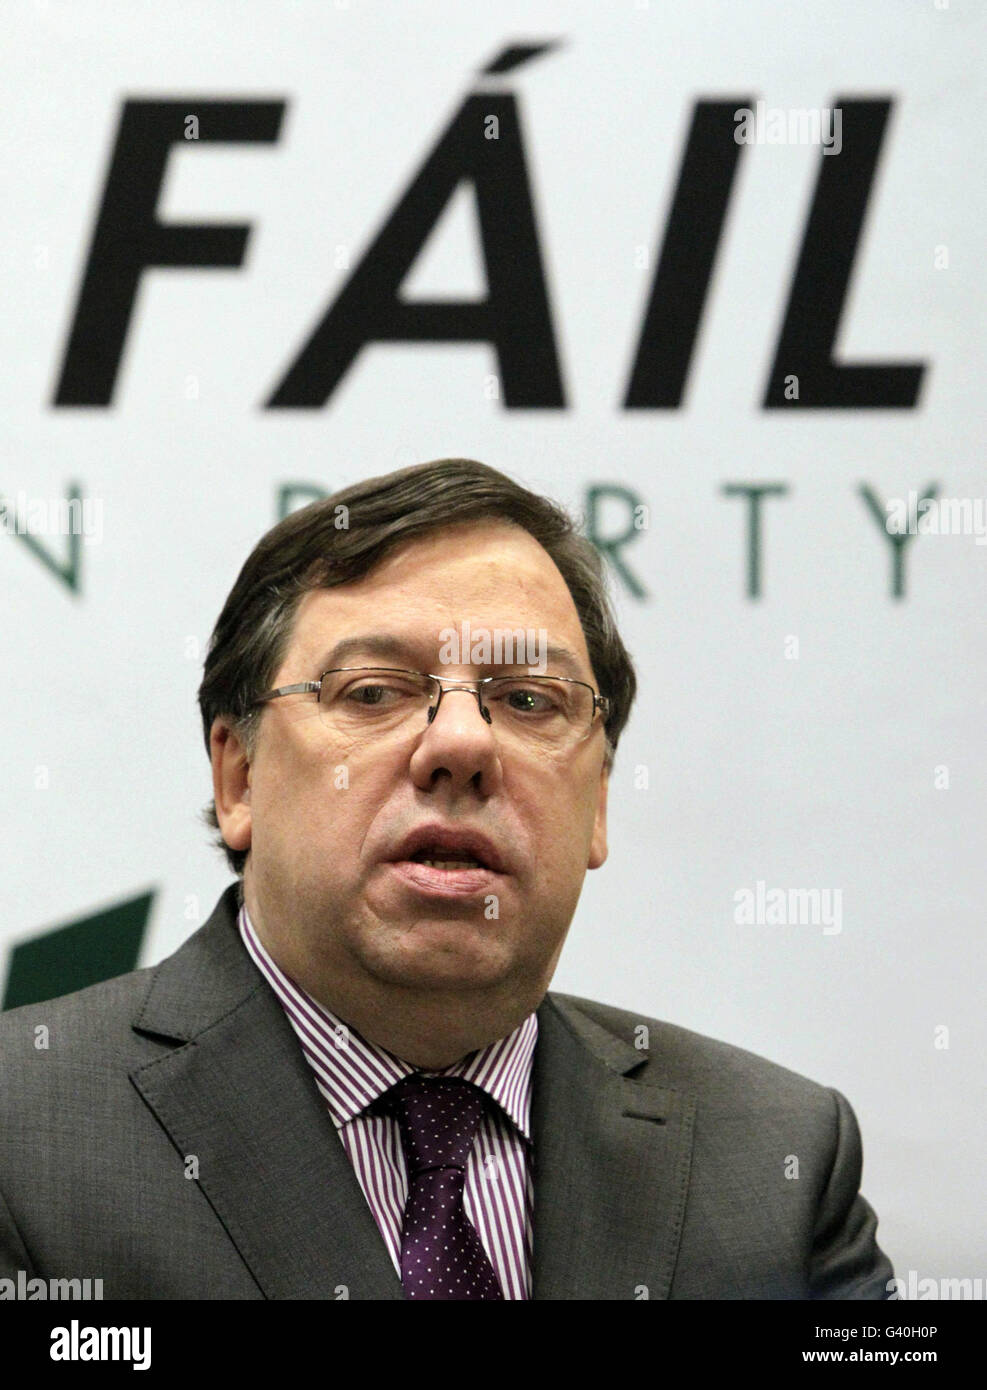 Taoiseach Brian Cowen speaks to the media during a press conference at the Alexander Hotel in Dublin, where he confirmed he would remain as leader of his ruling Fianna Fail party. Stock Photo